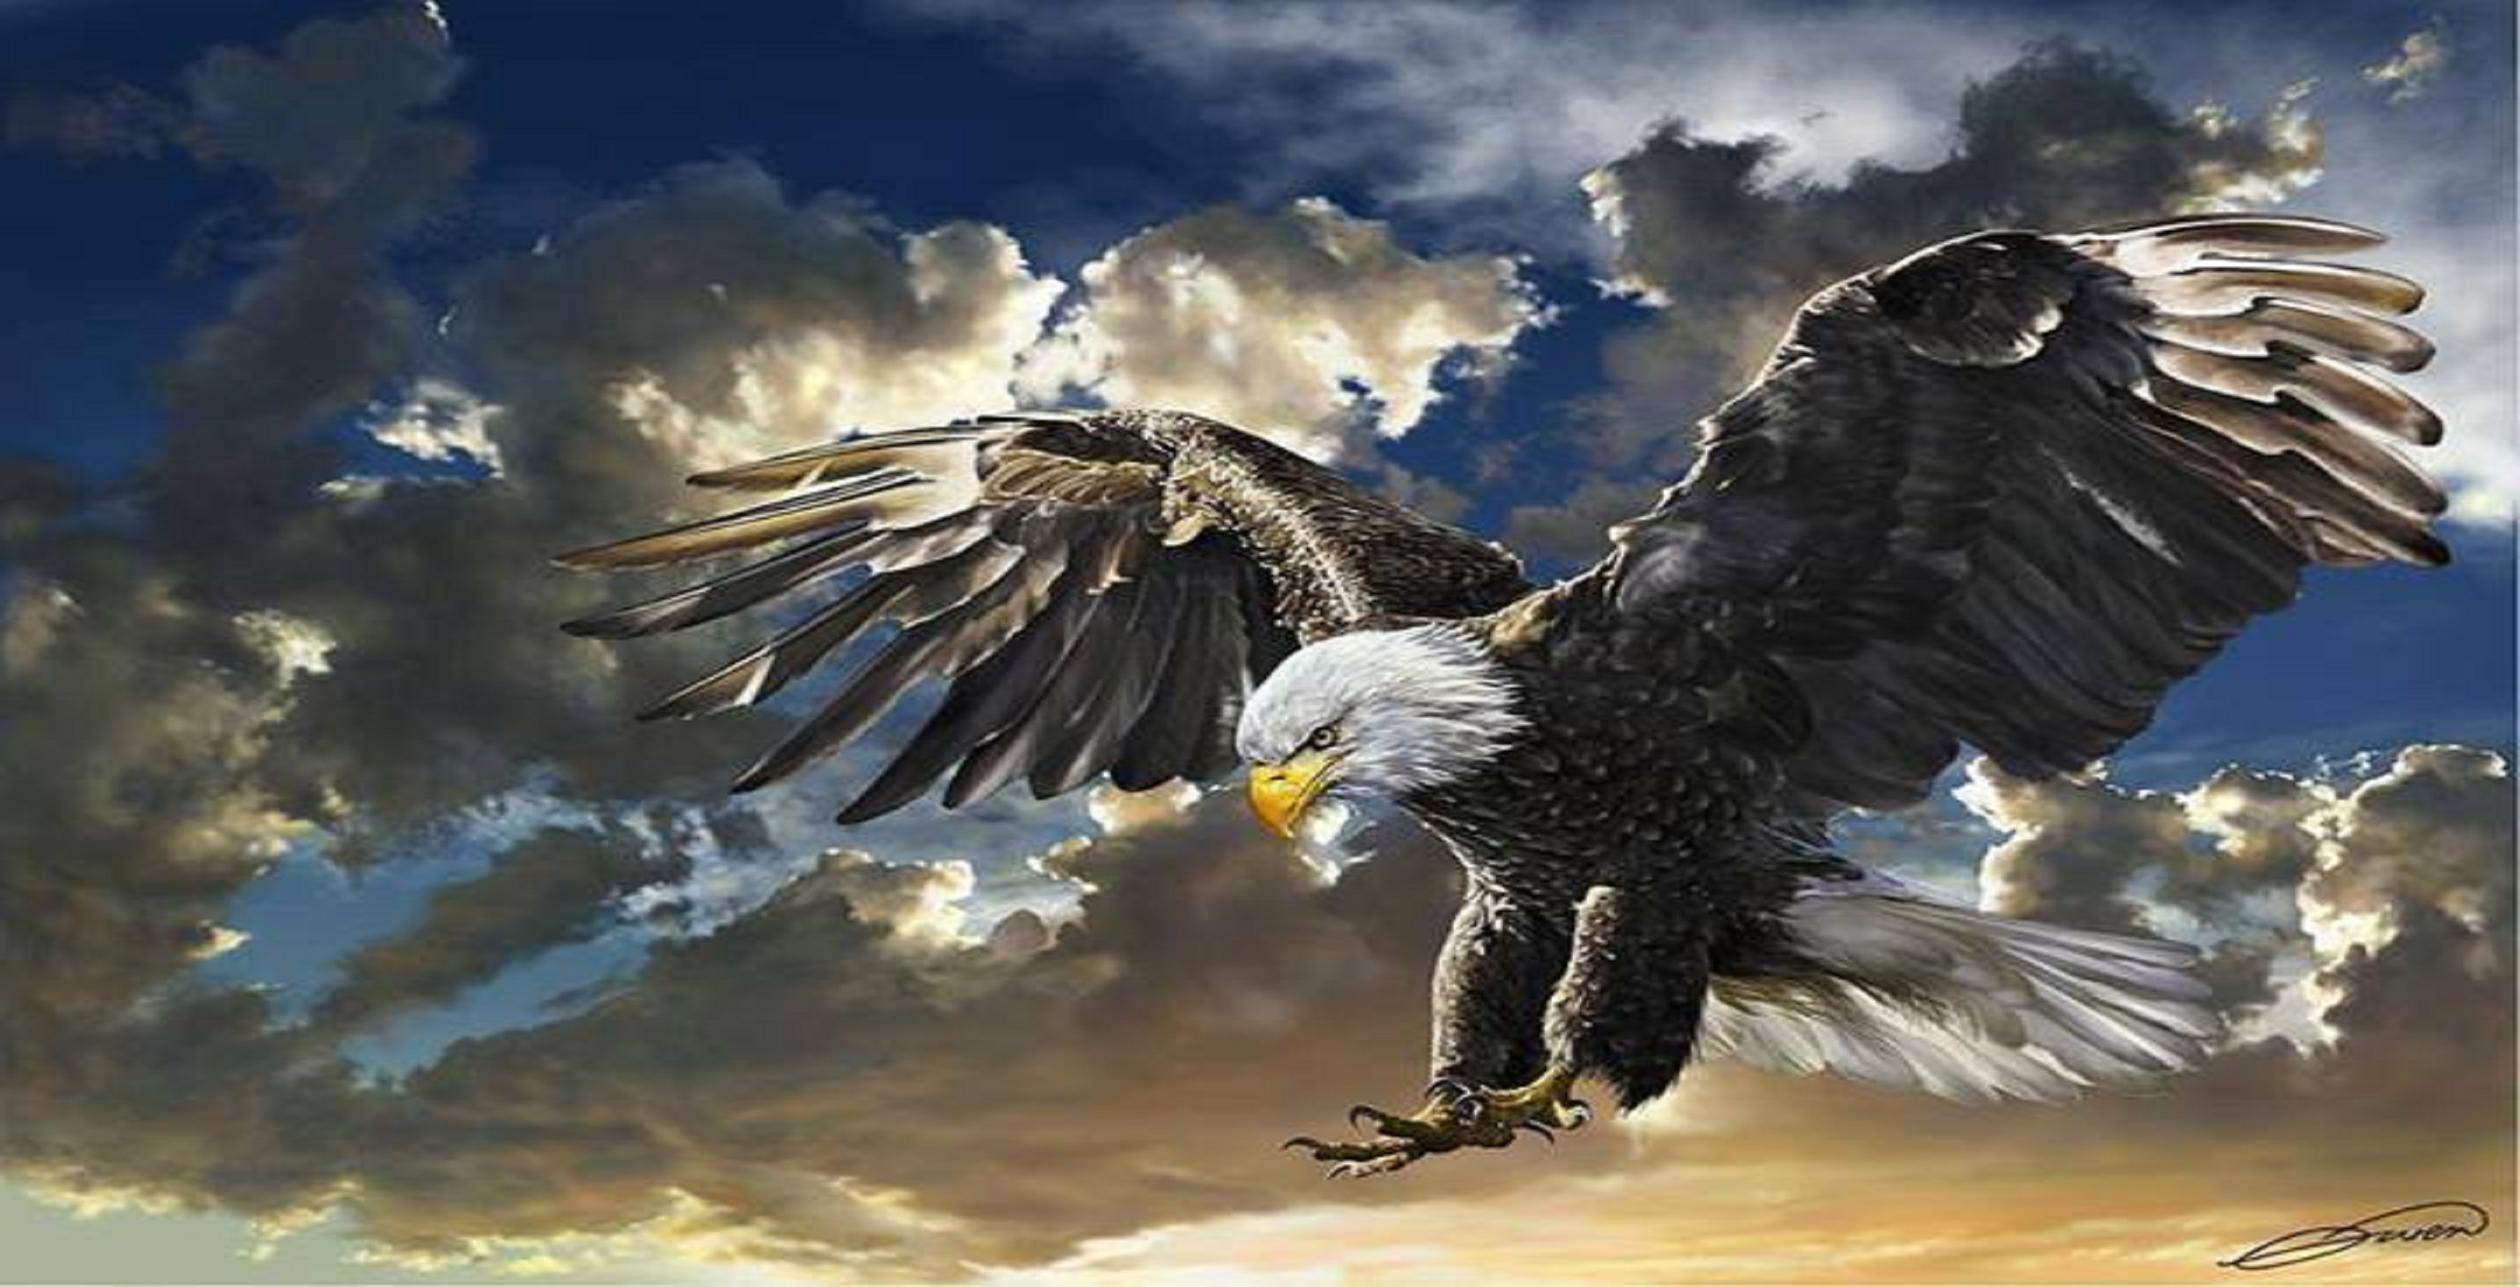 Gallery For Gt Eagle Painting